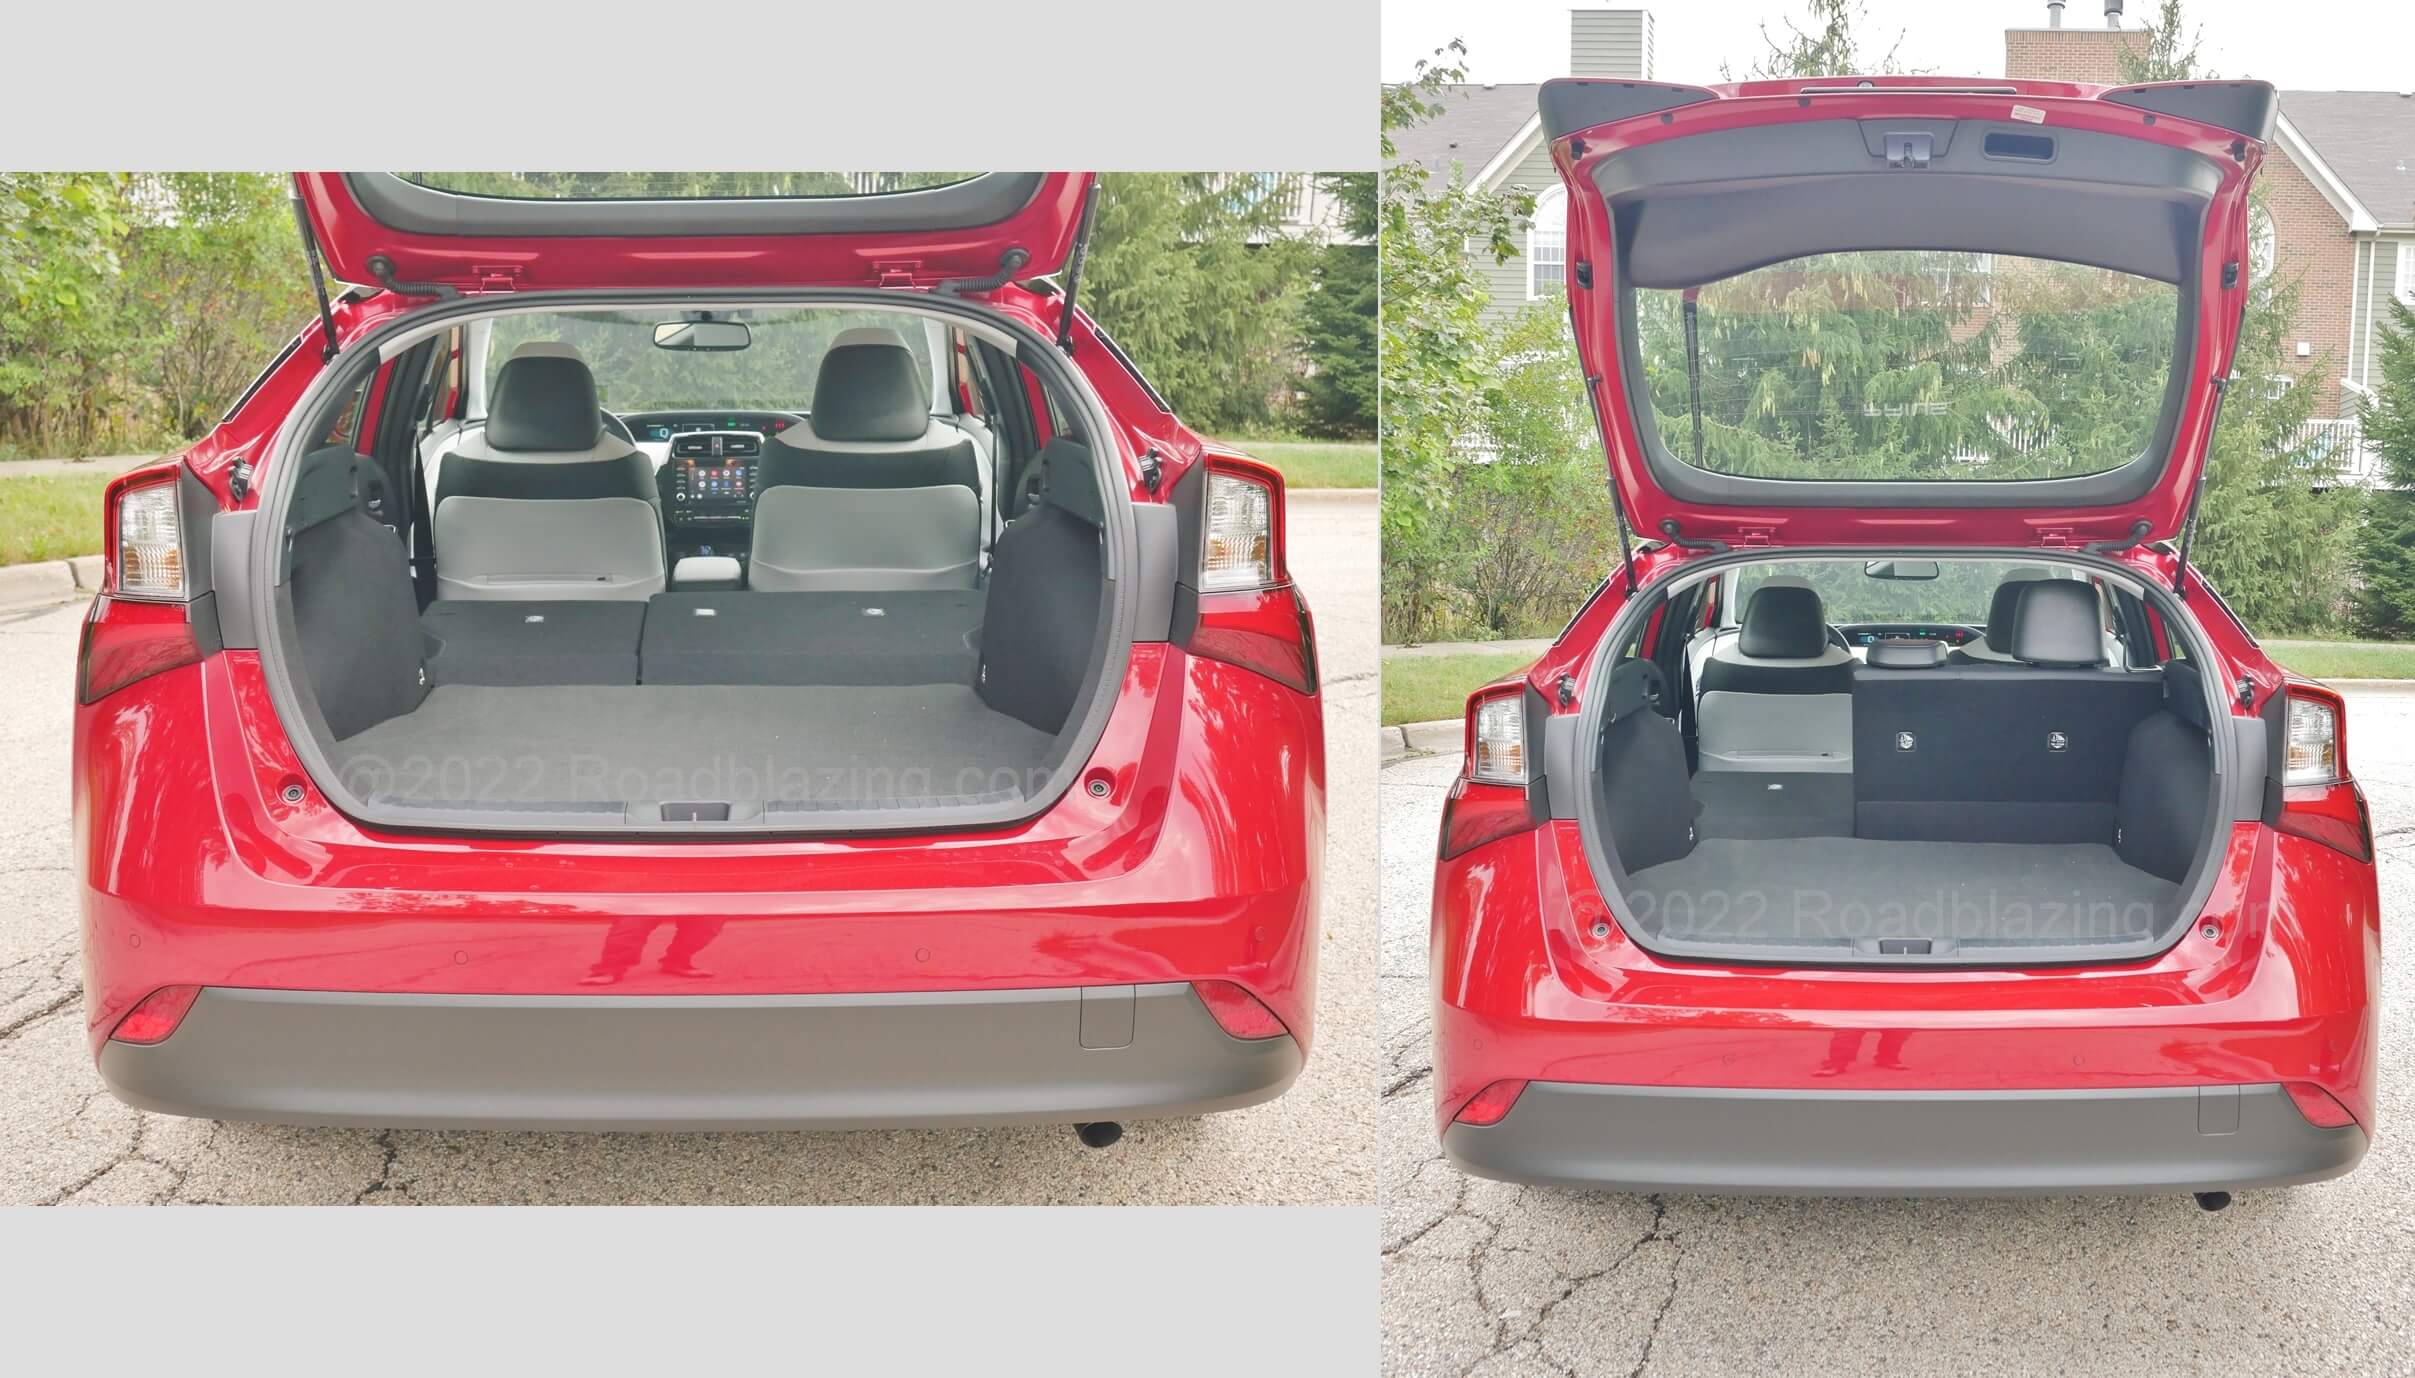 2022 Toyota Prius XLE AWD-e: 57 cubic feet of low load lift over expanded cargo bay capacity